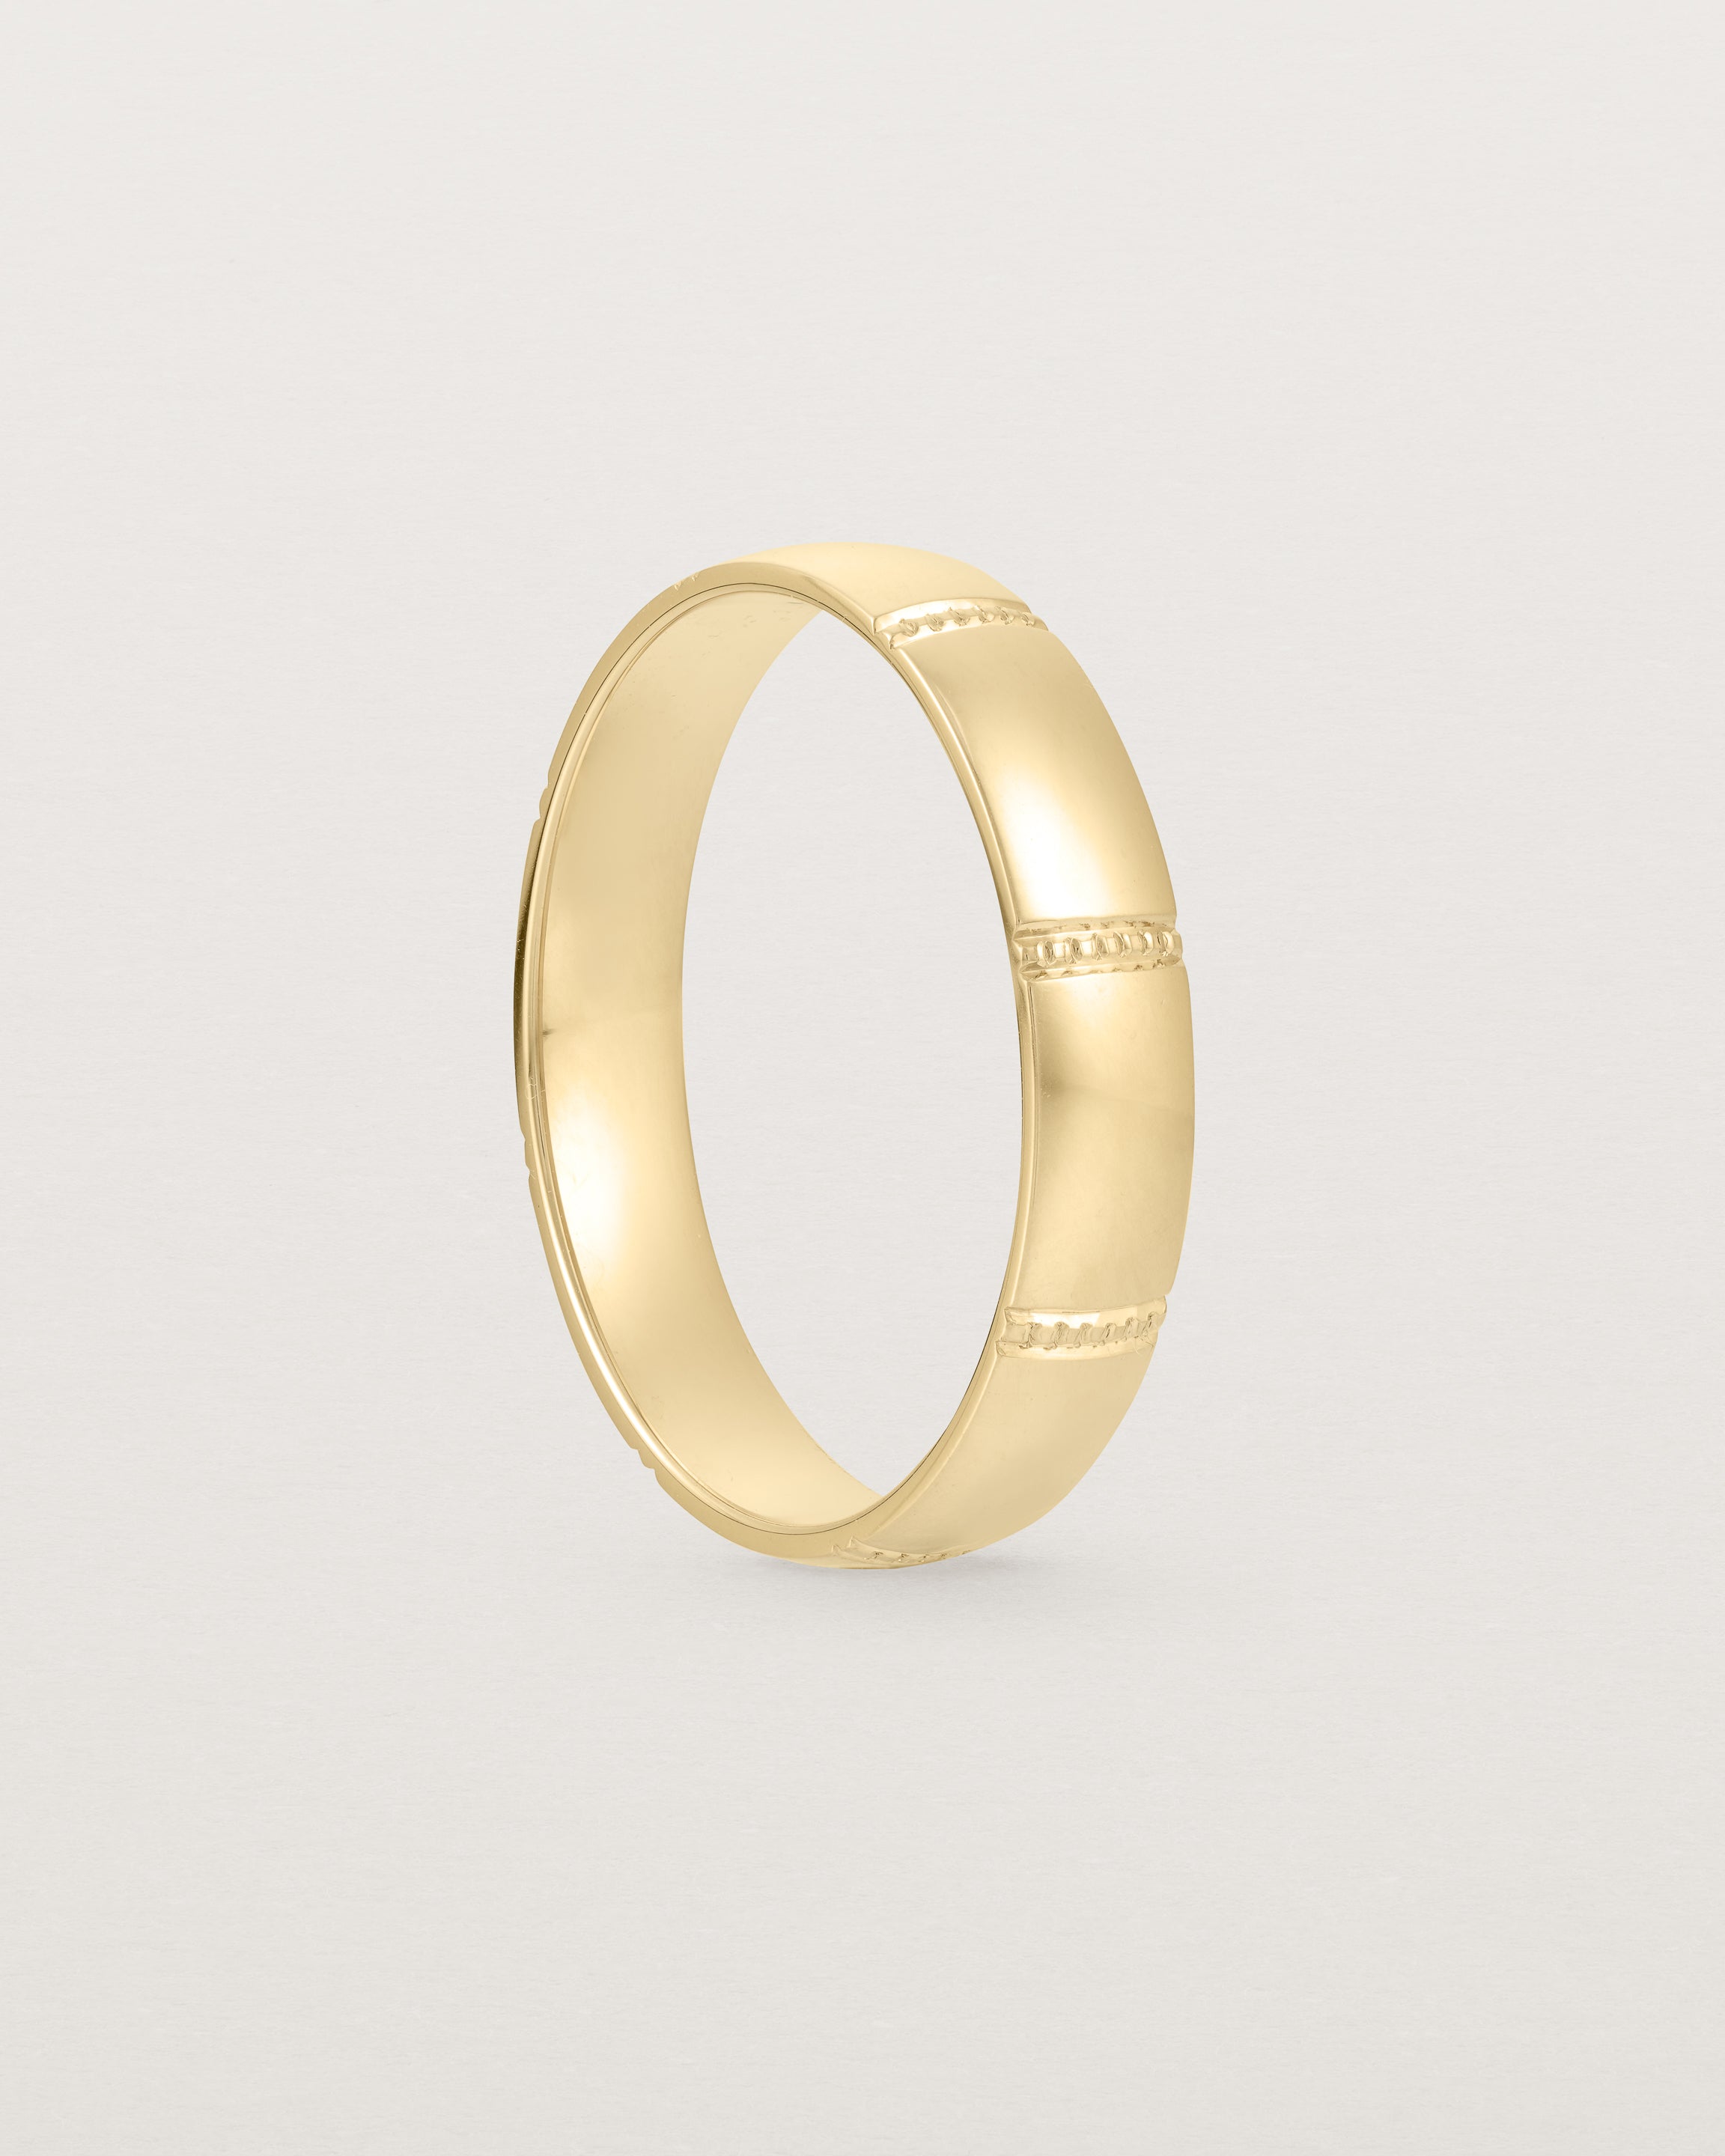 Standing view of the Grain Wedding Ring | 4mm | Yellow Gold.